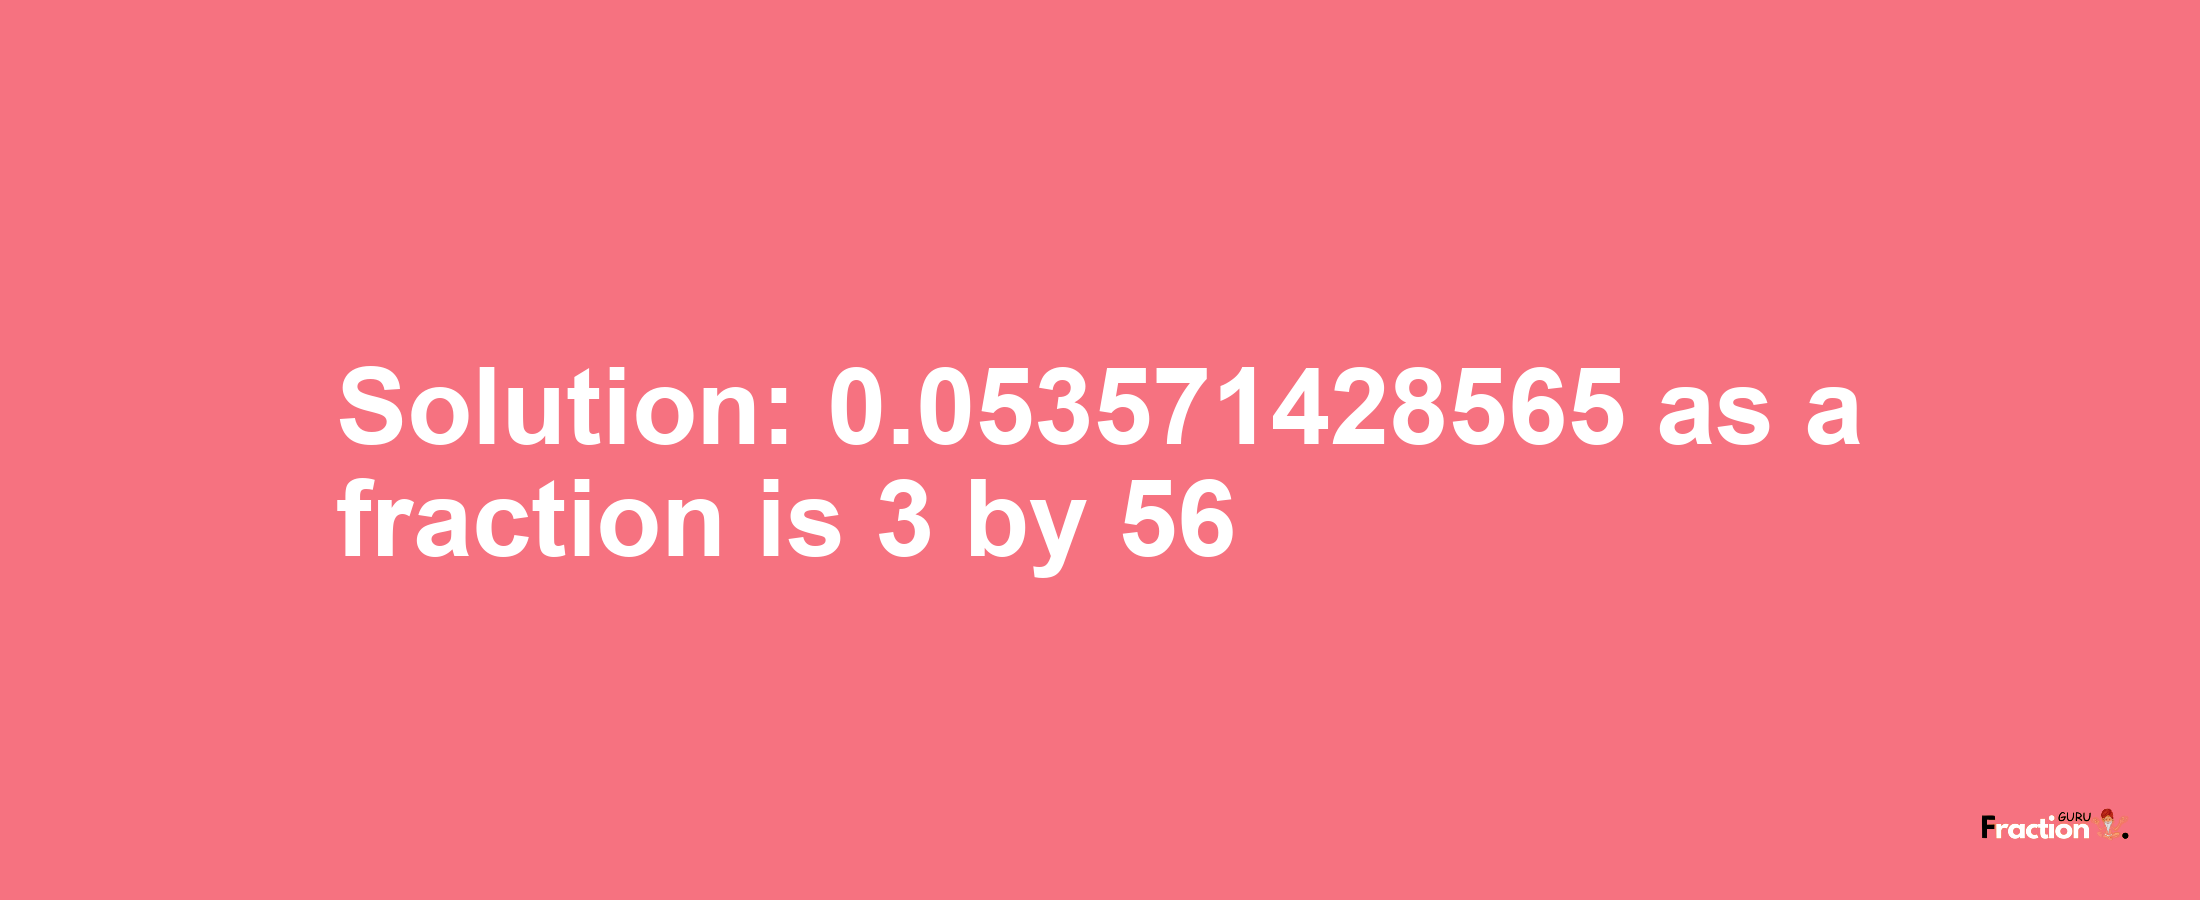 Solution:0.053571428565 as a fraction is 3/56